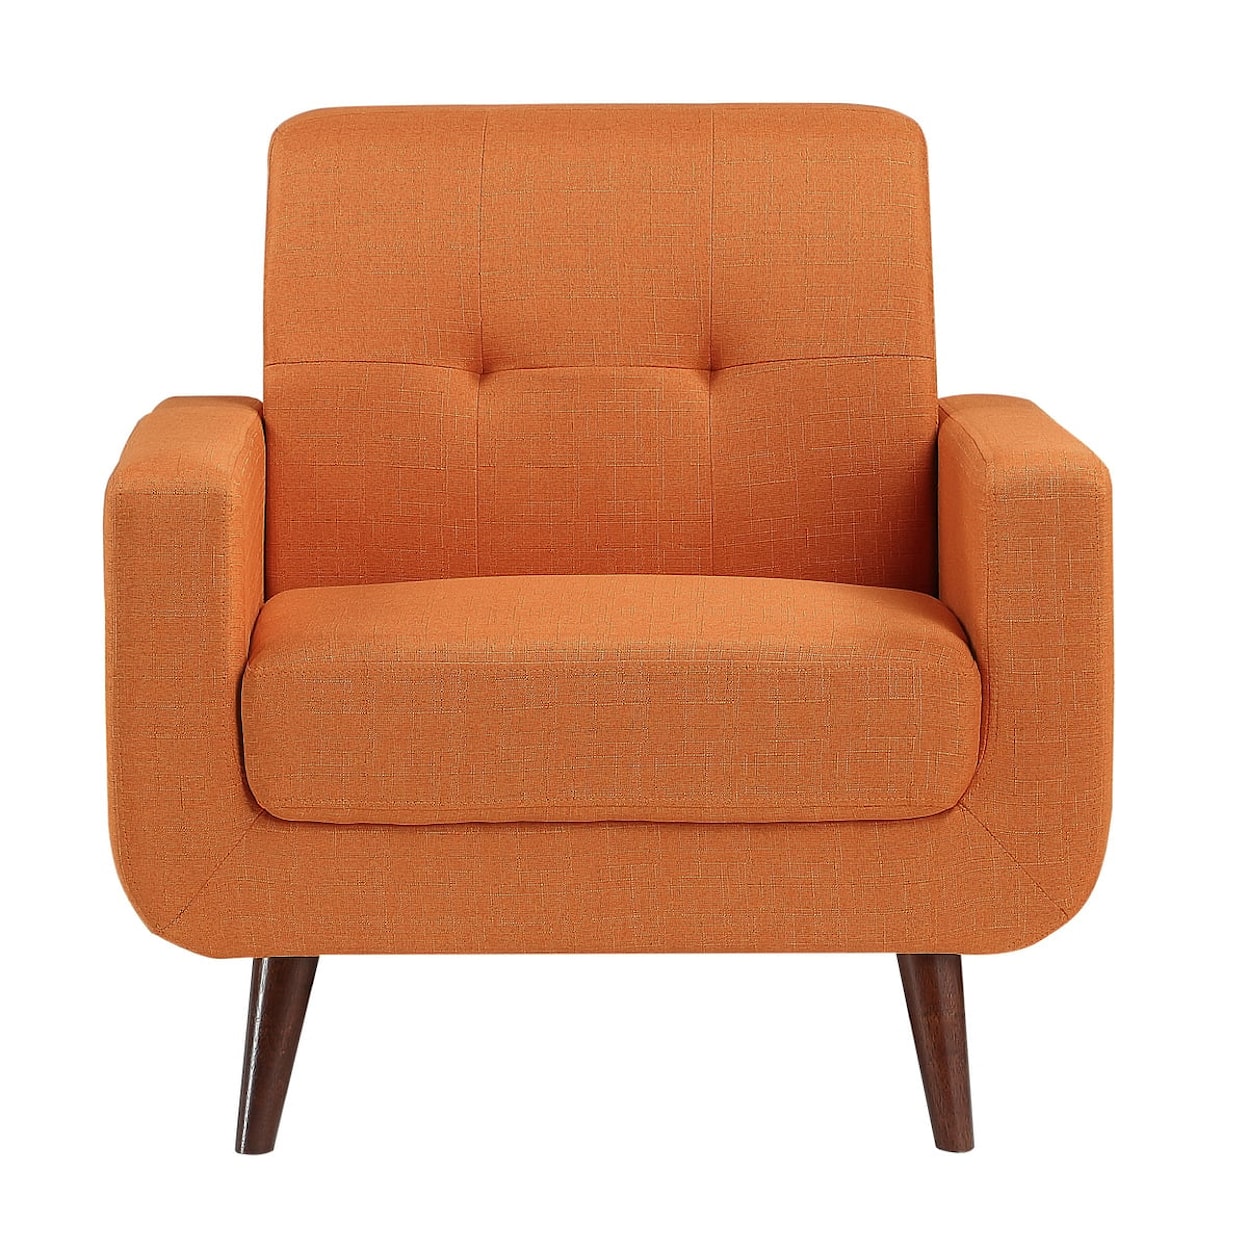 Homelegance Fitch Chair